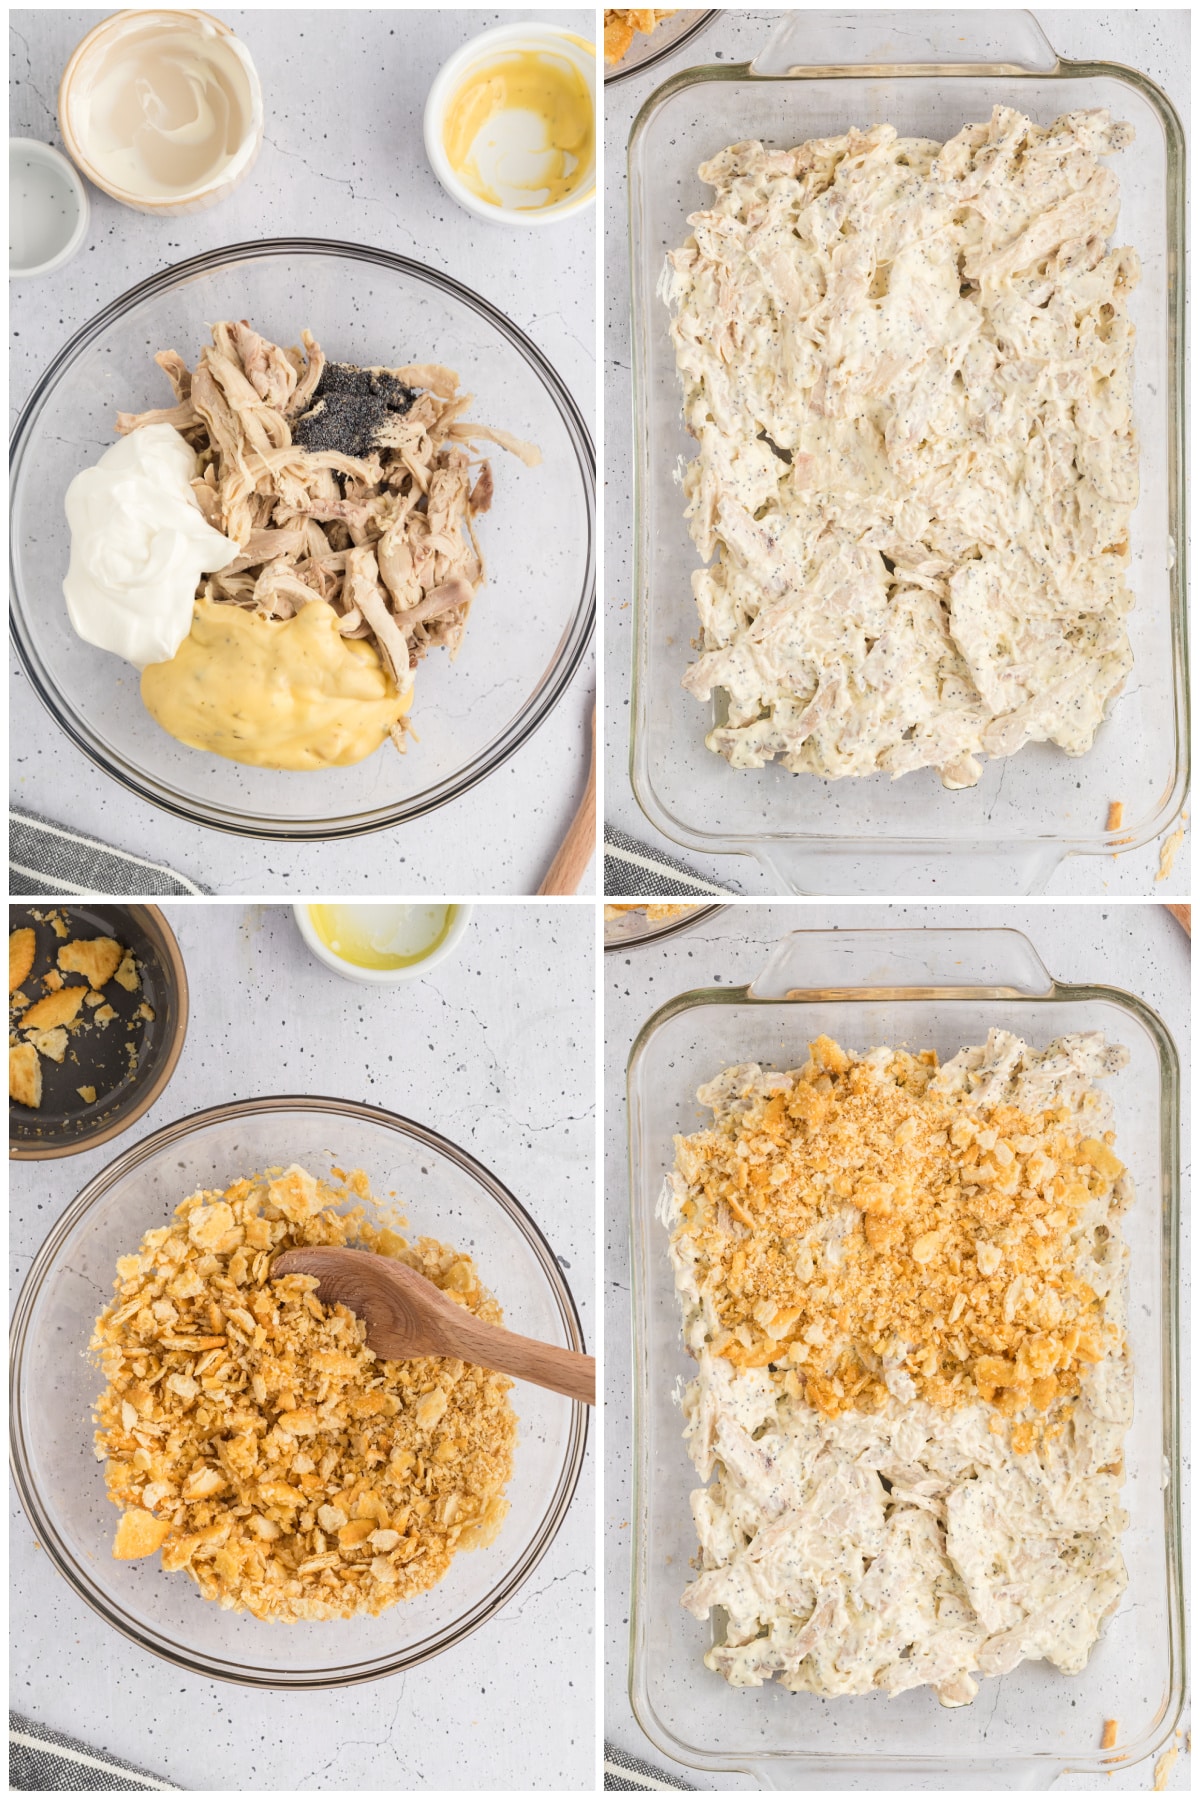 A step by step instructions to make the chicken casserole dish.